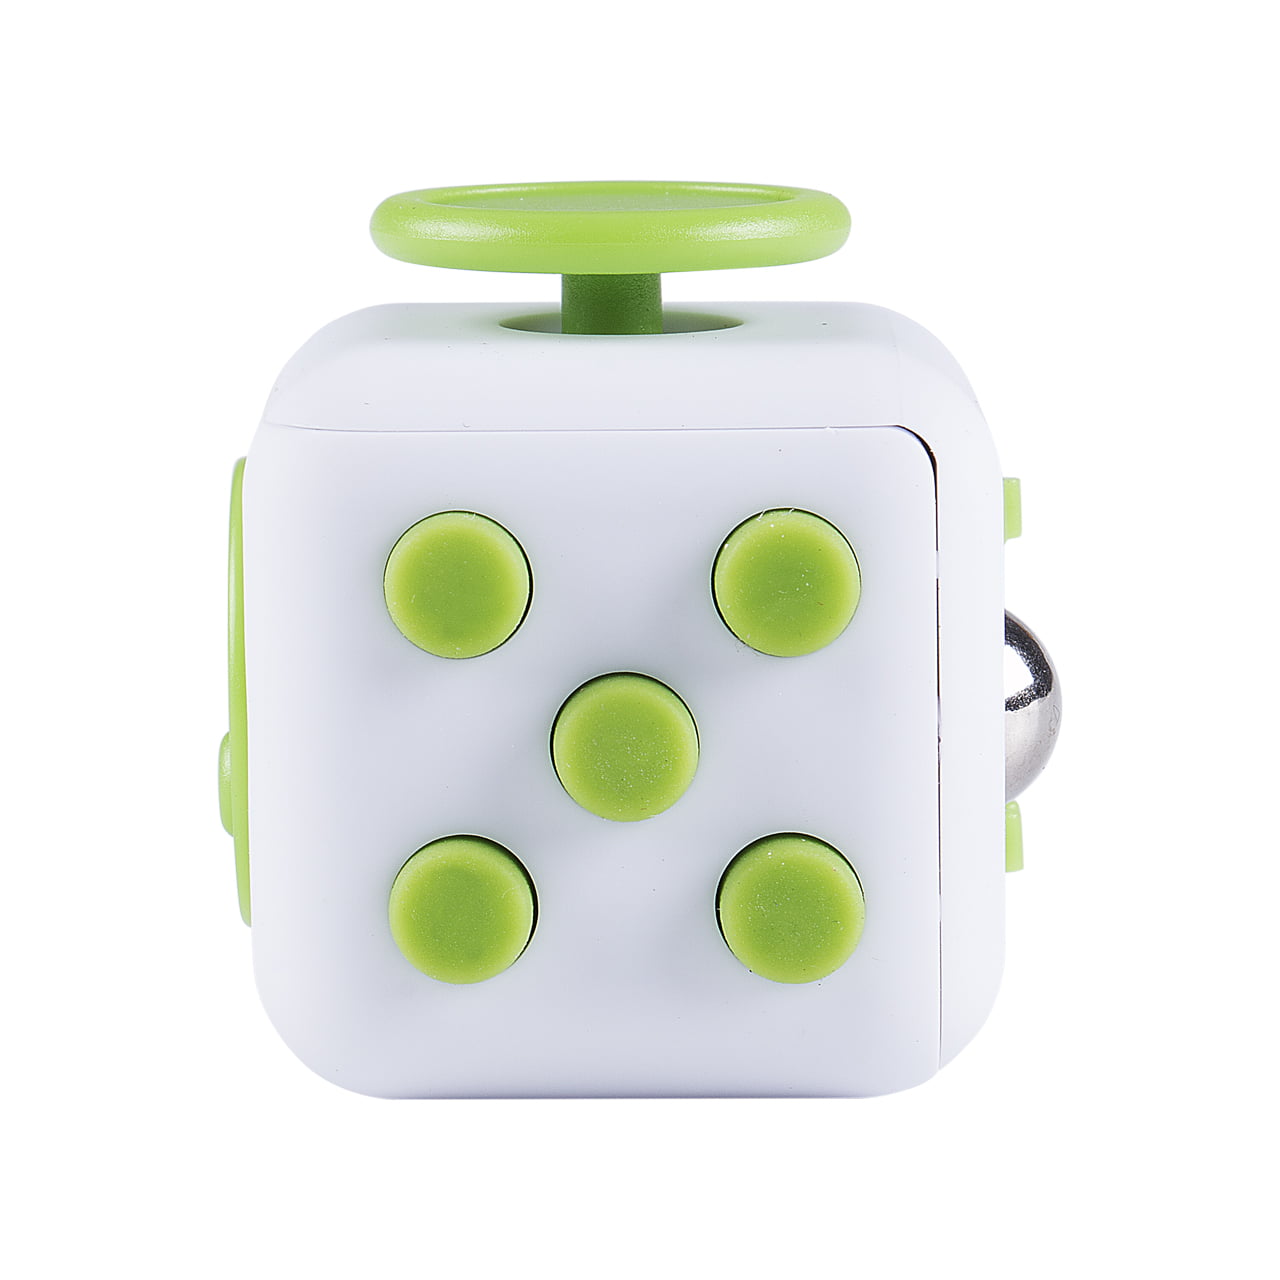 Fidget Cube Anxiety Stress Relief Focus 6-side Finger Toy Black  Green 